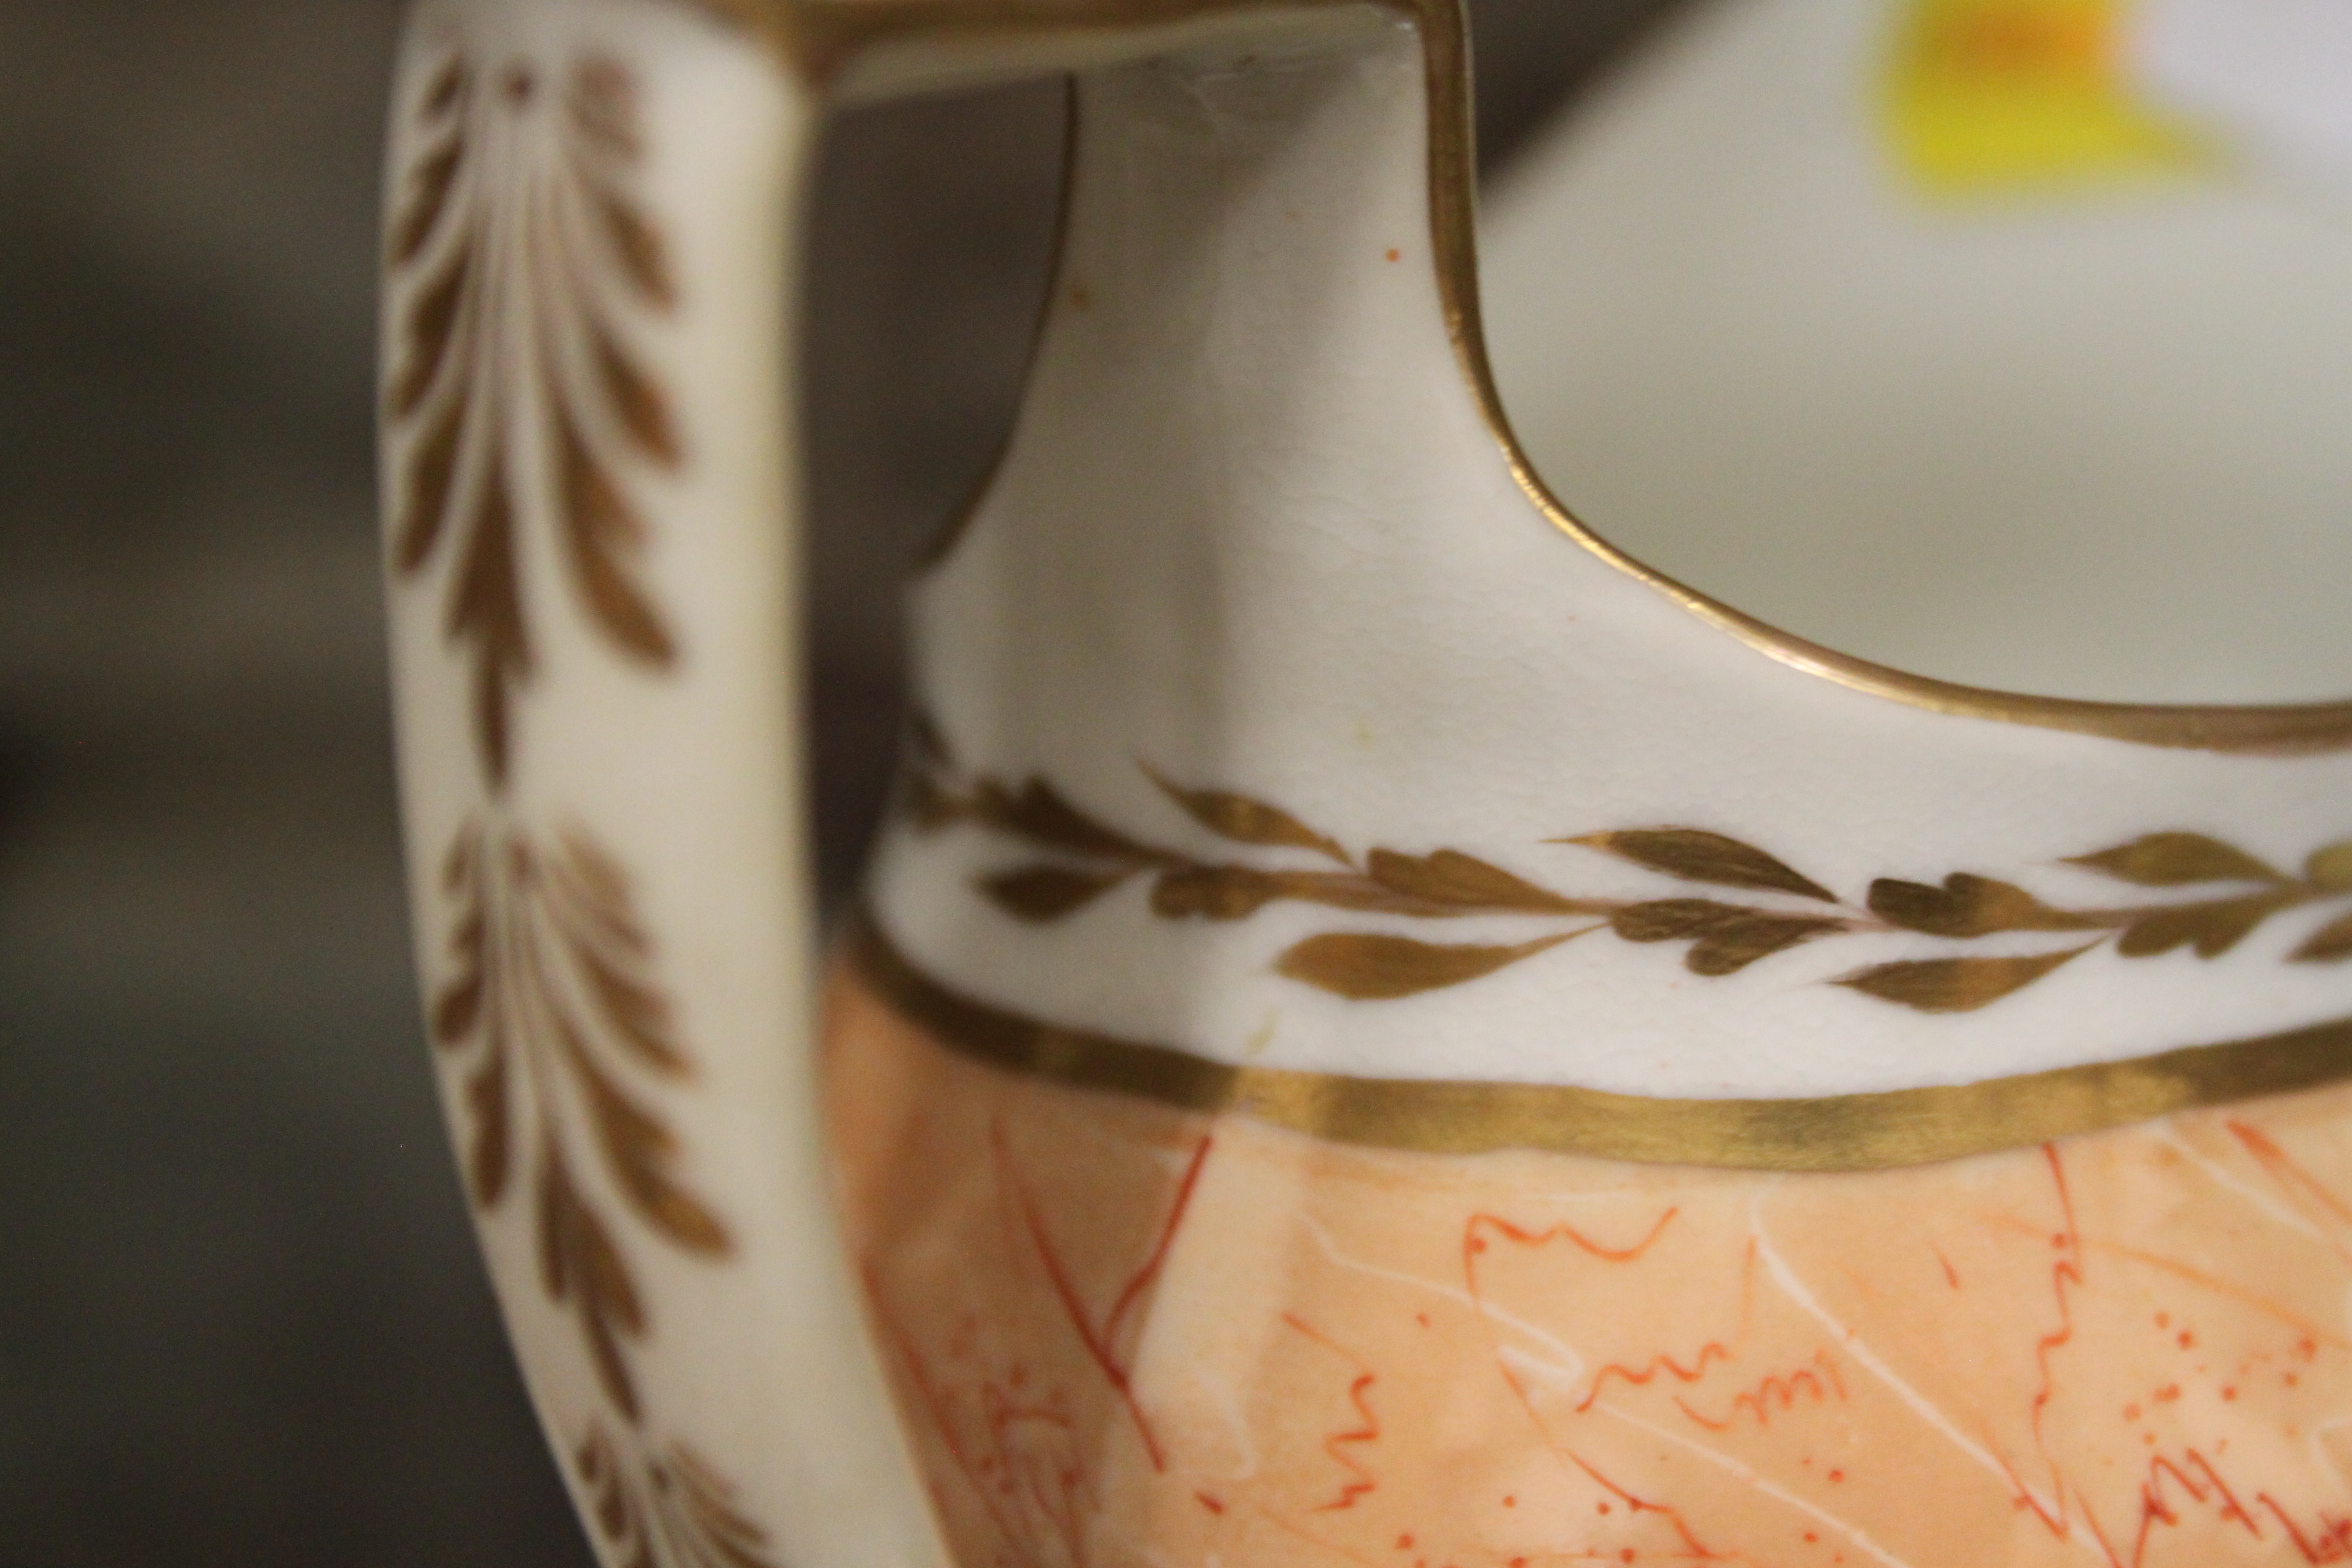 An 18th century English porcelain tea bowl, decorated insects and flowers, a Ridgeway jug with - Image 22 of 29